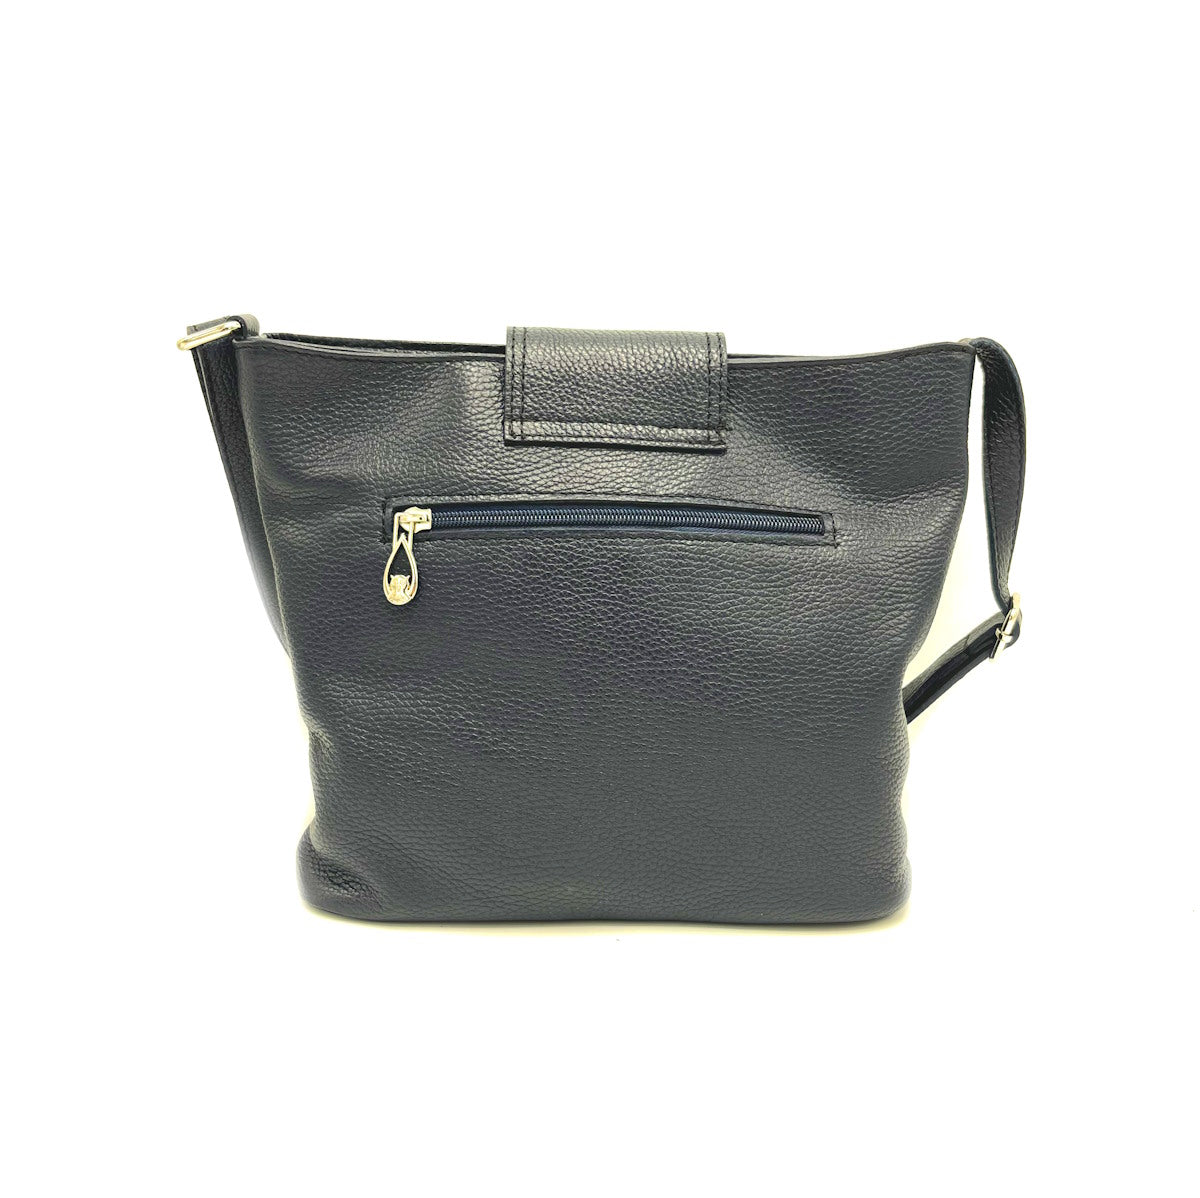 Genuine leather shoulder bag,Made in Italy, art. 112479